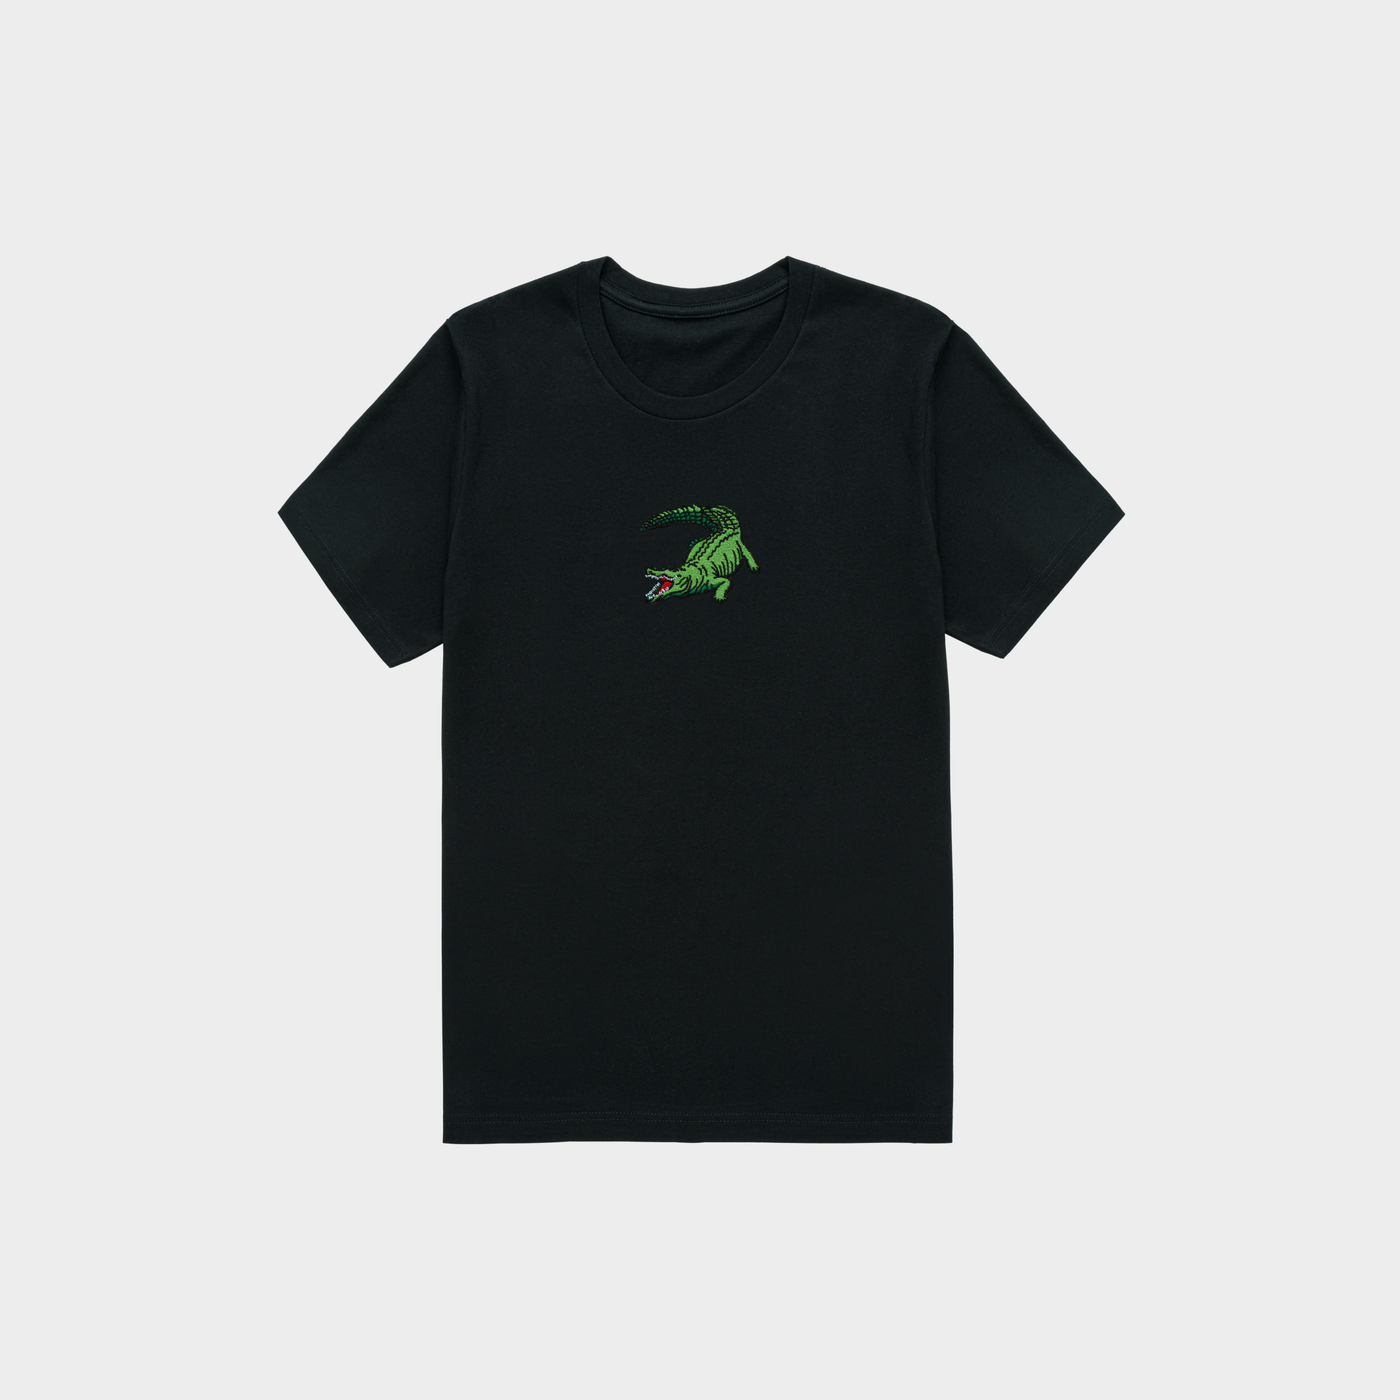 Bobby's Planet Kids Embroidered Saltwater Crocodile T-Shirt from Australia Down Under Animals Collection in Black Color#color_black